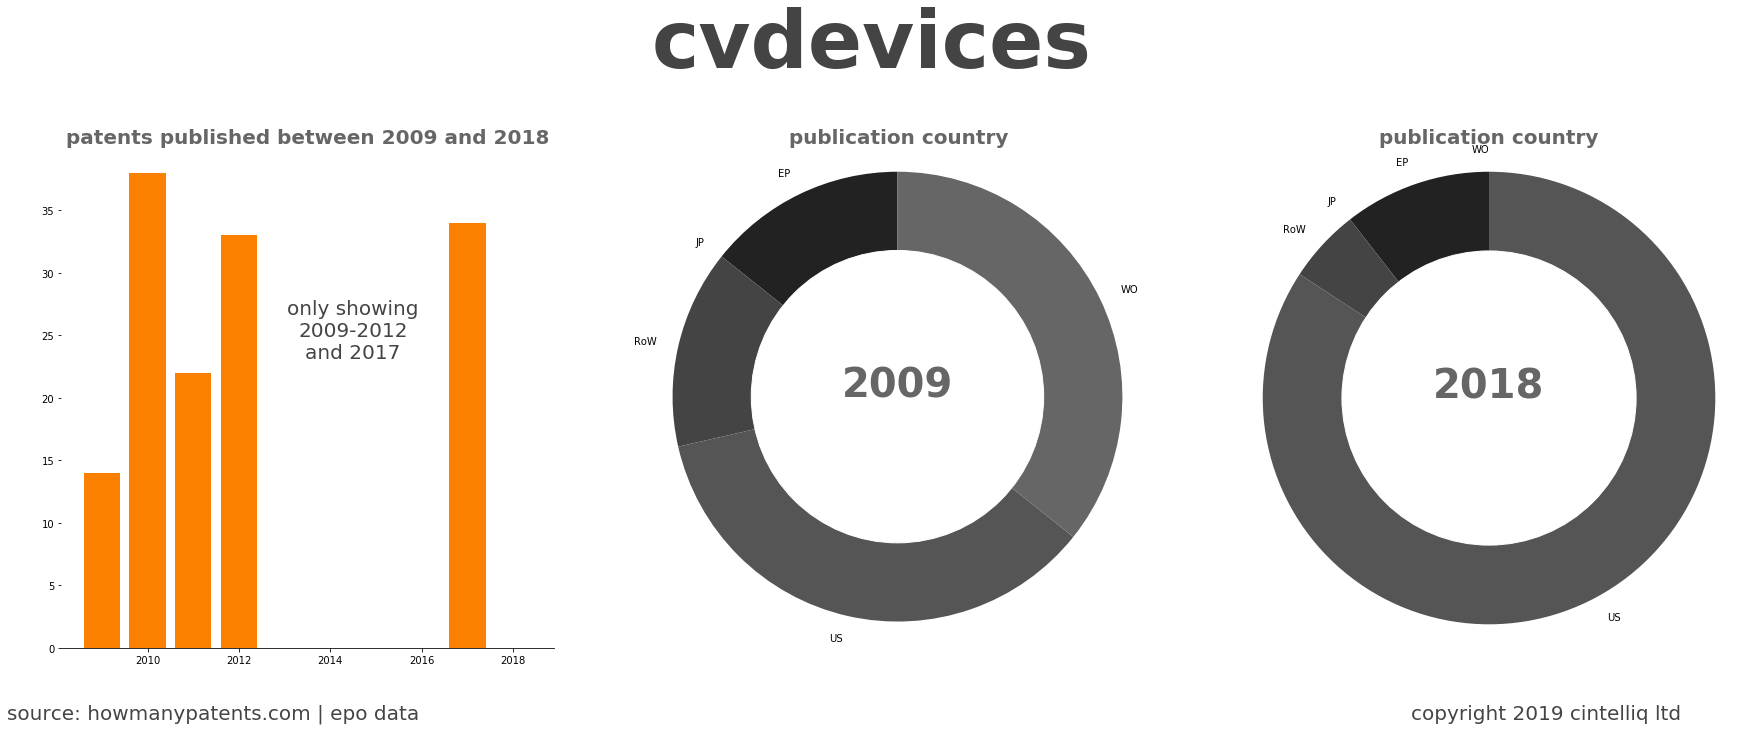 summary of patents for Cvdevices